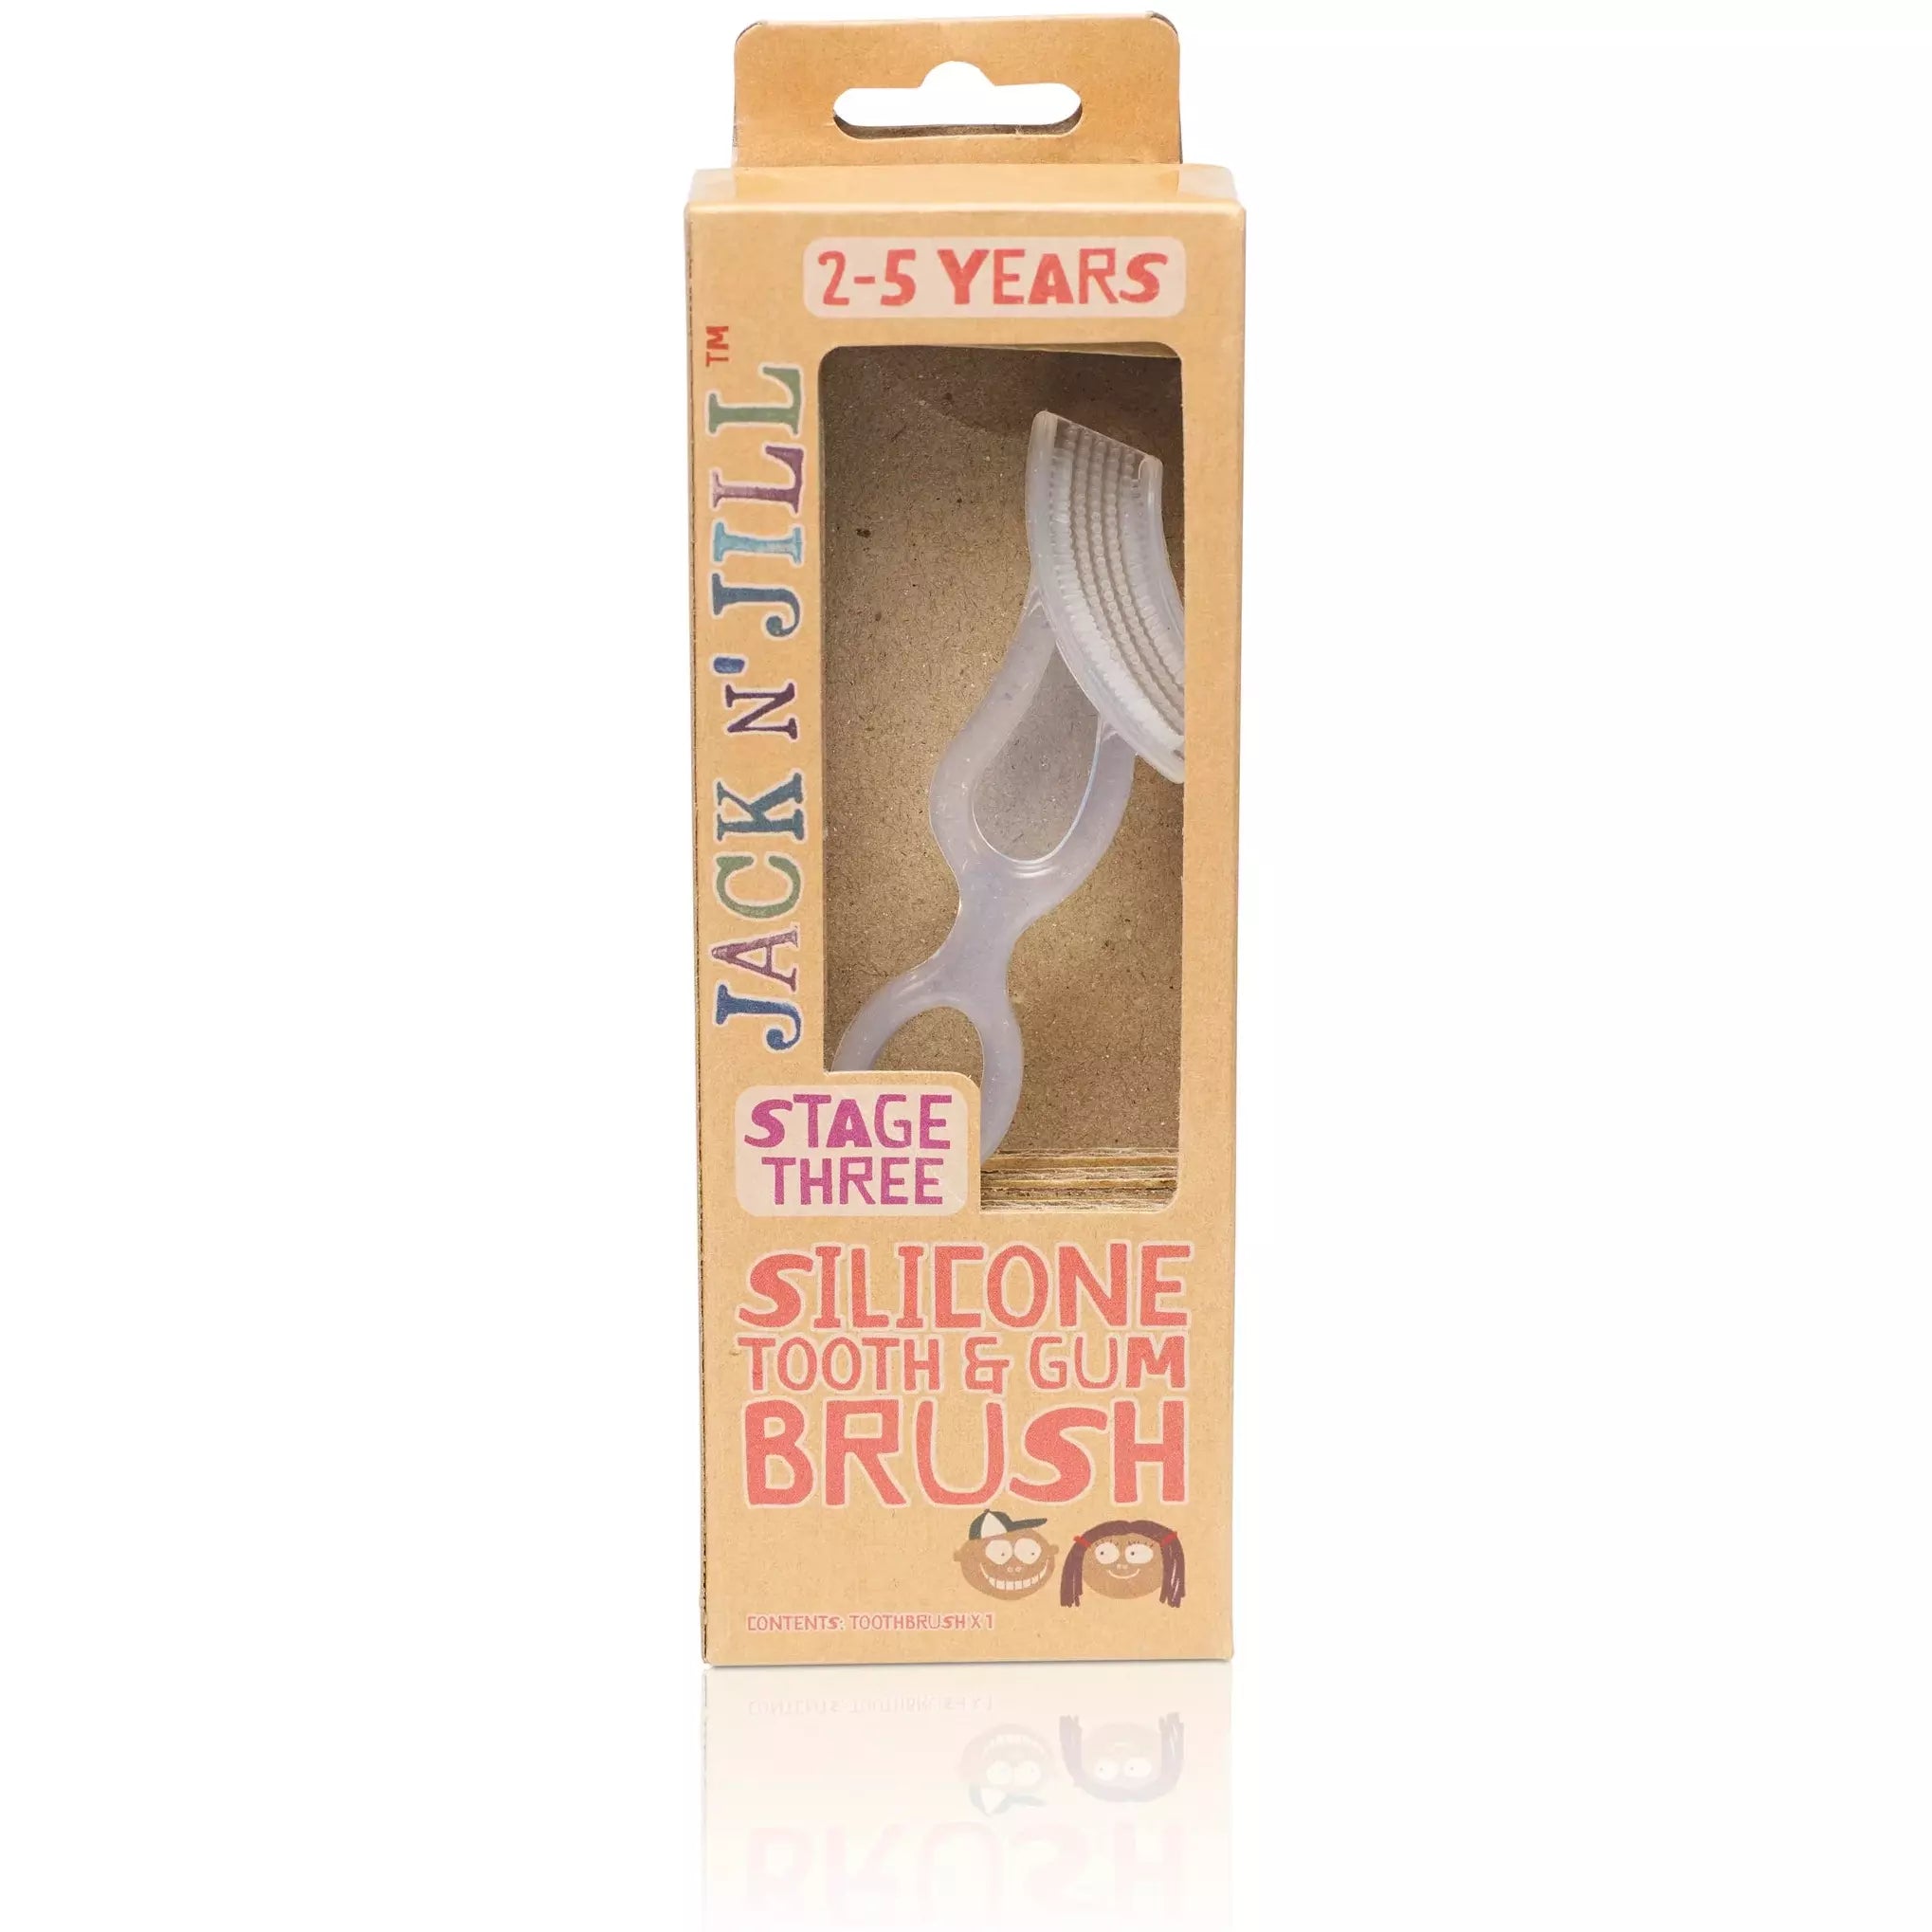 Jack n' Jill - Silicone Tooth & Gum Brush(2-5 years)